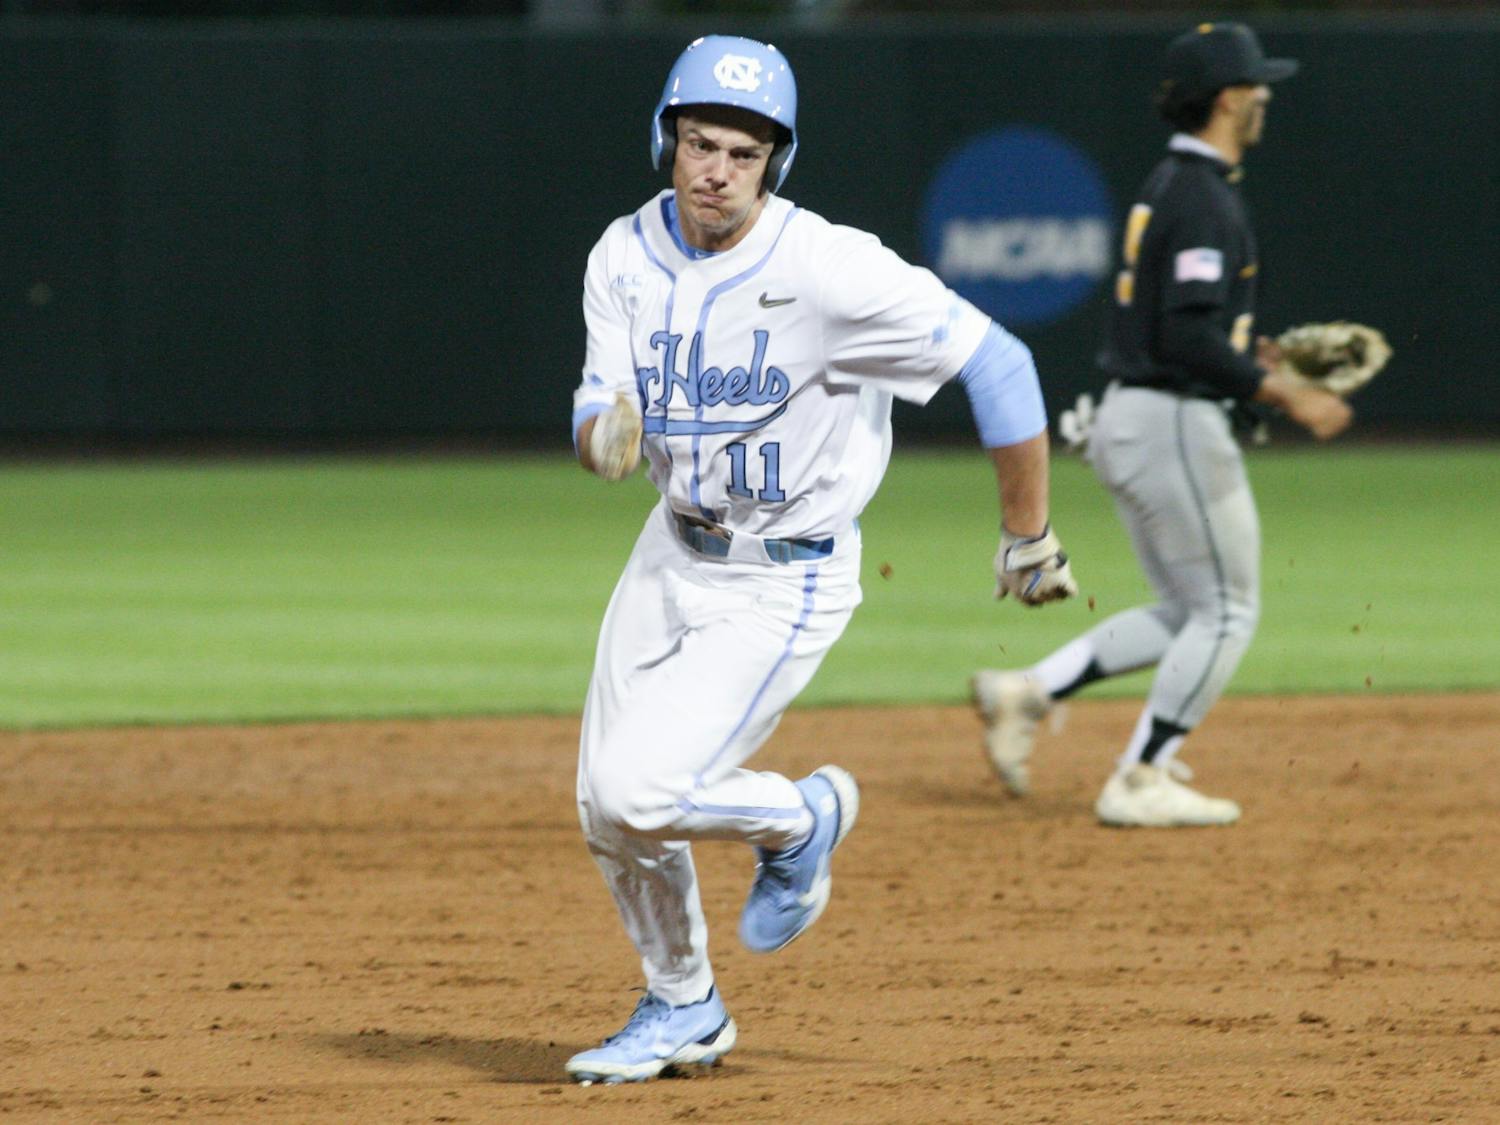 UNC freshman outfielder Reece Holbrook (11) runs towards third base during a home game at Boshamer Stadium against Appalachian State on Tuesday, March 22, 2022.